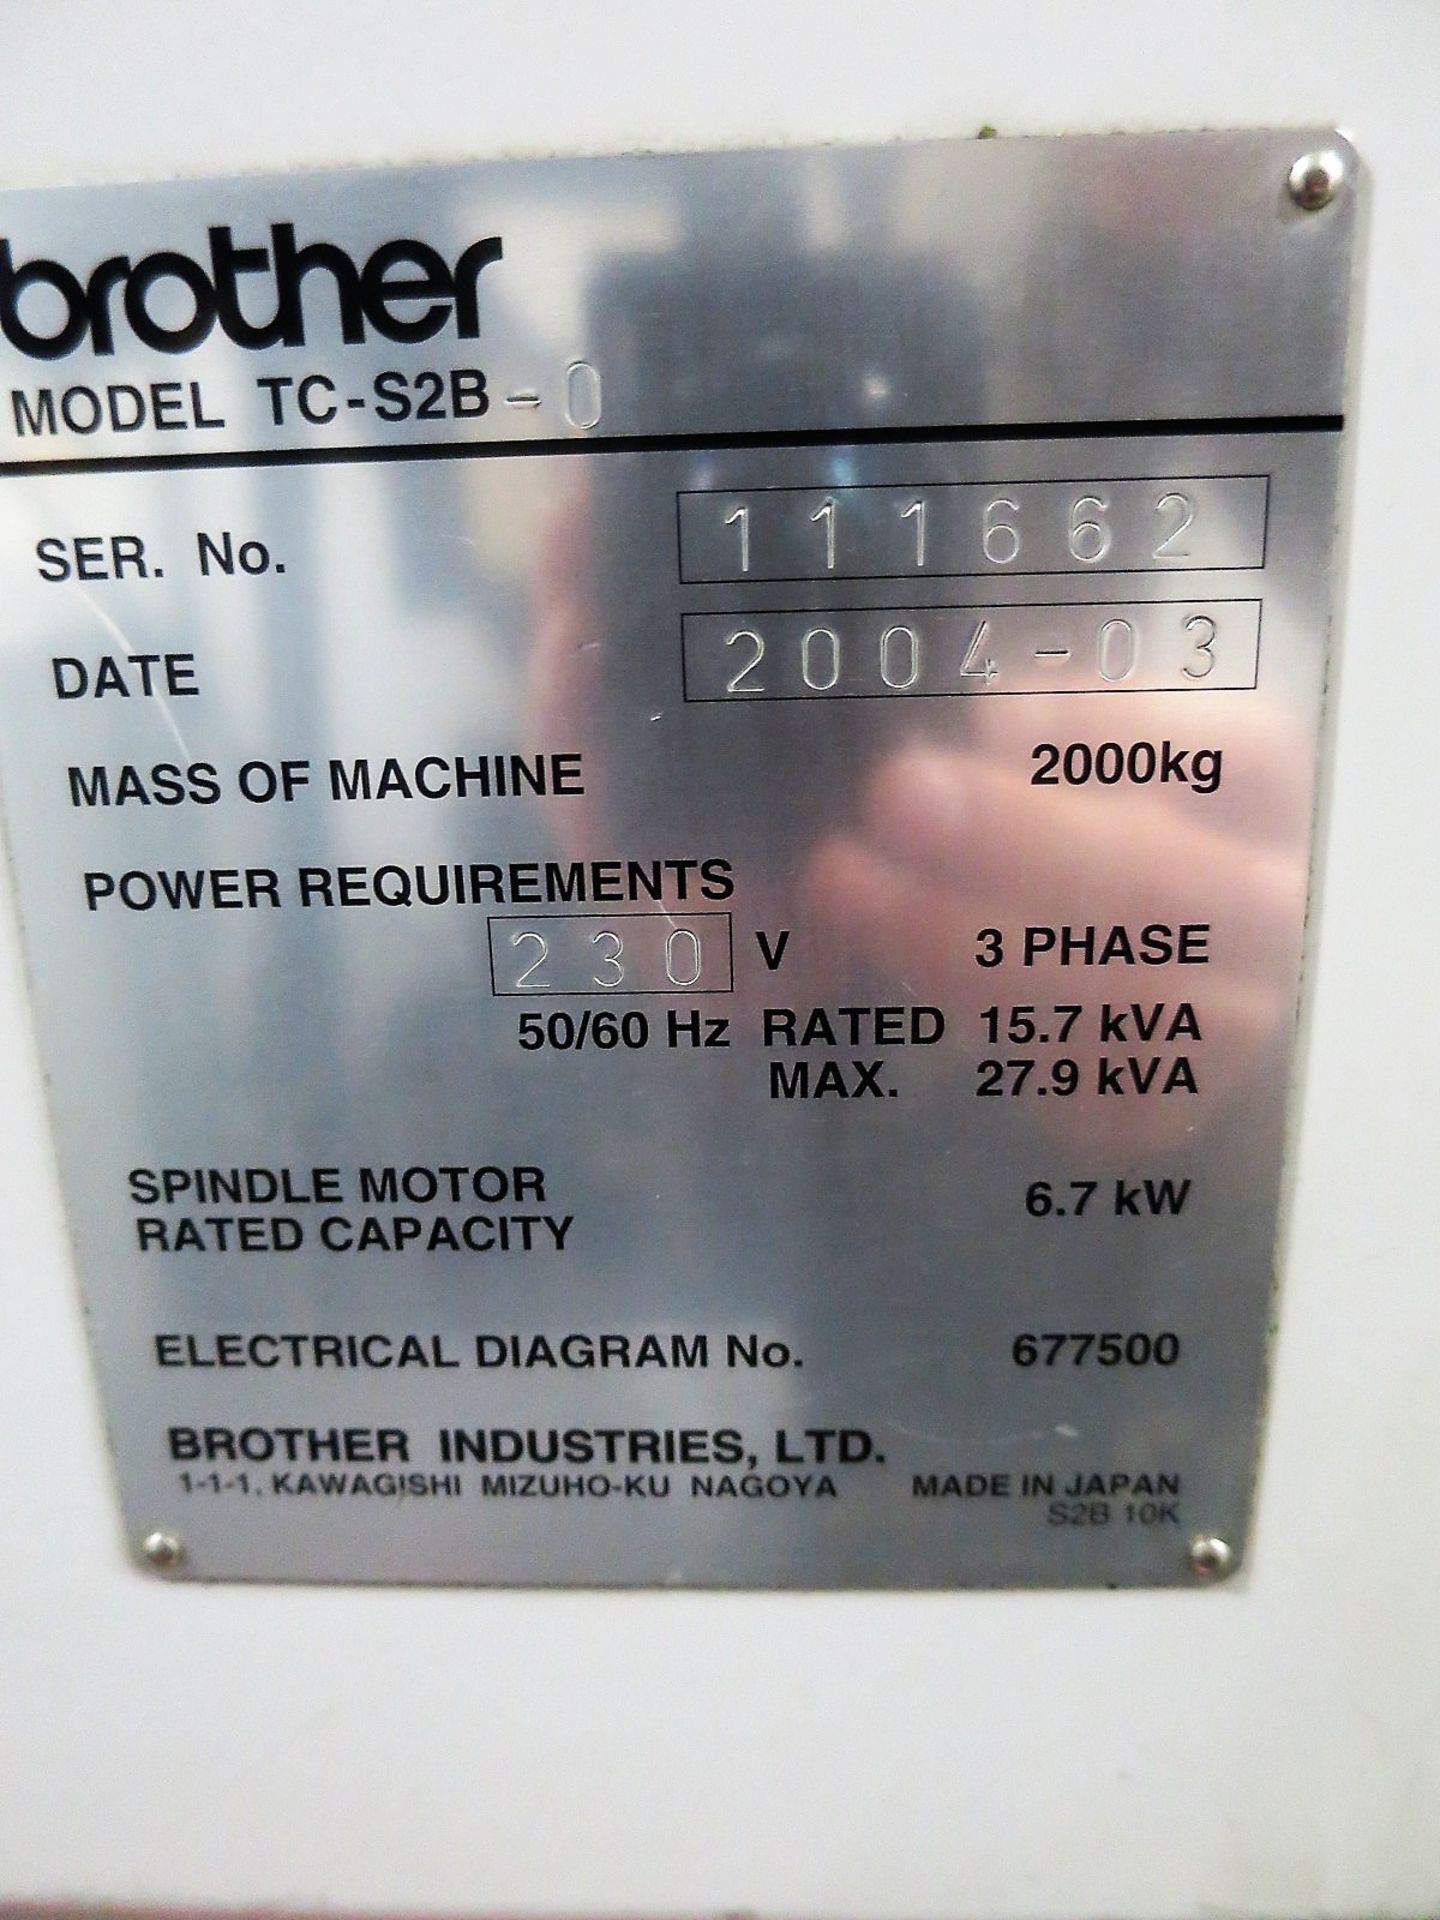 Brother TC-S2B-0 CNC 4-Axis Drill Tap Vertical Machining Center, S/N 111632, New 2004 - Image 8 of 10